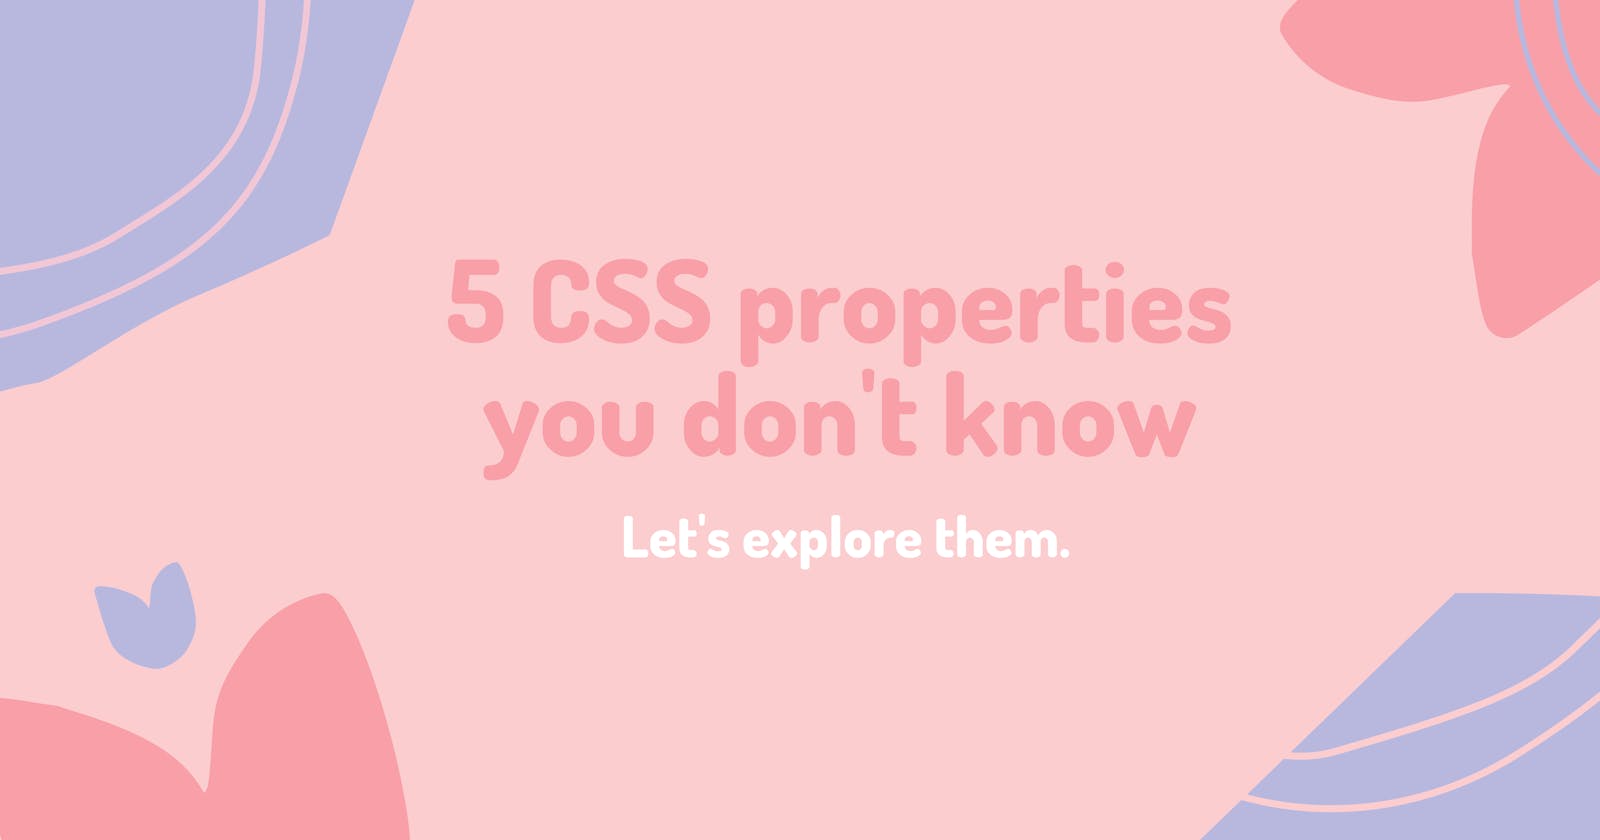 5 CSS properties you don't know